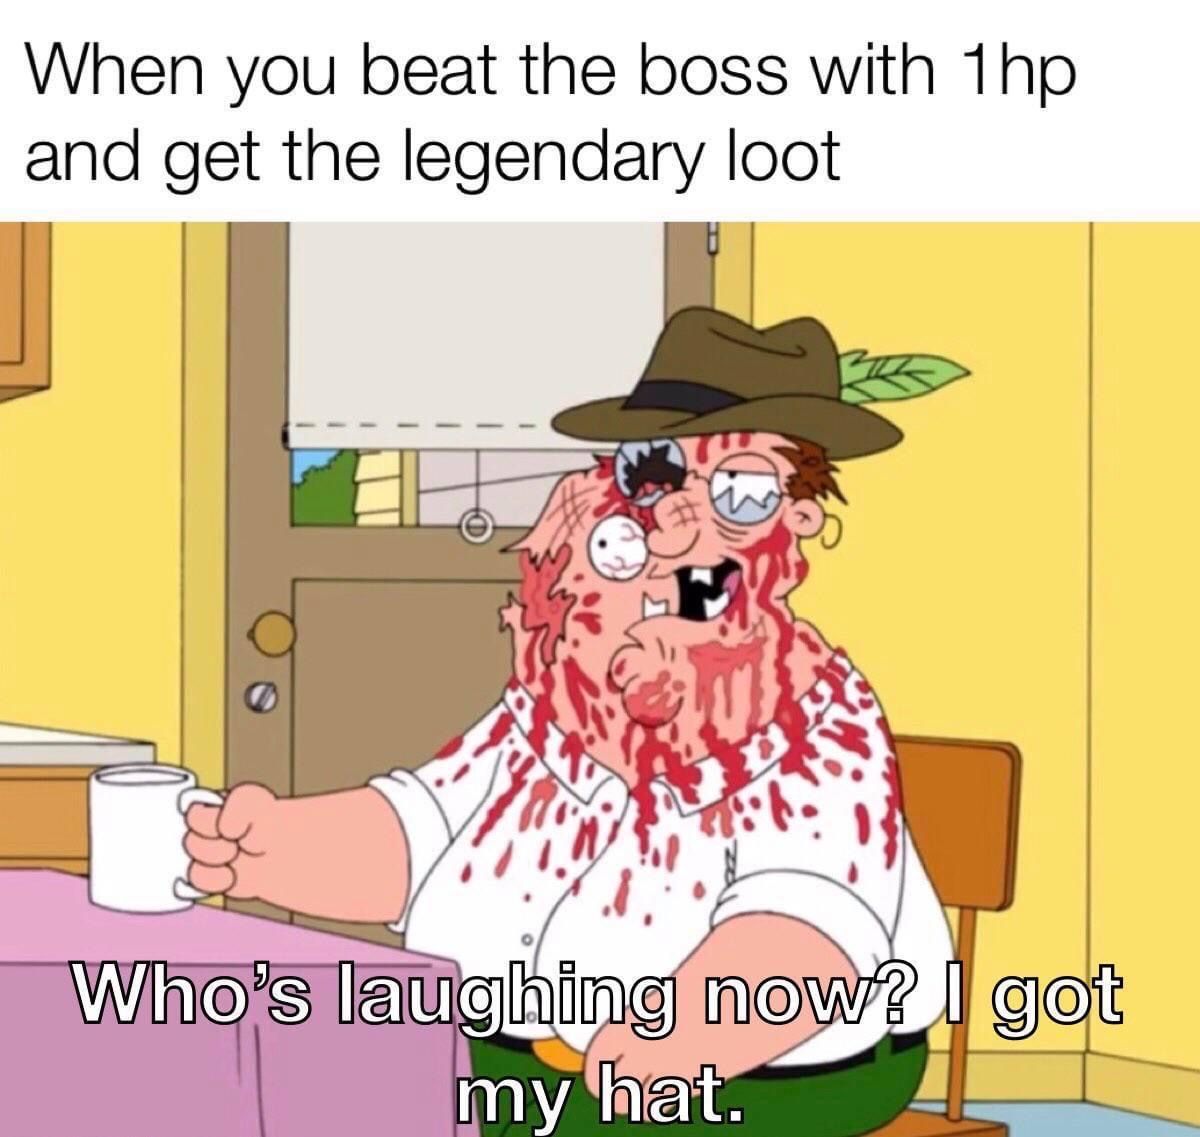 funny gaming memes - who's laughing now i got my hat gif - When you beat the boss with 1hp and get the legendary loot Who's laughing now? I got my hat.